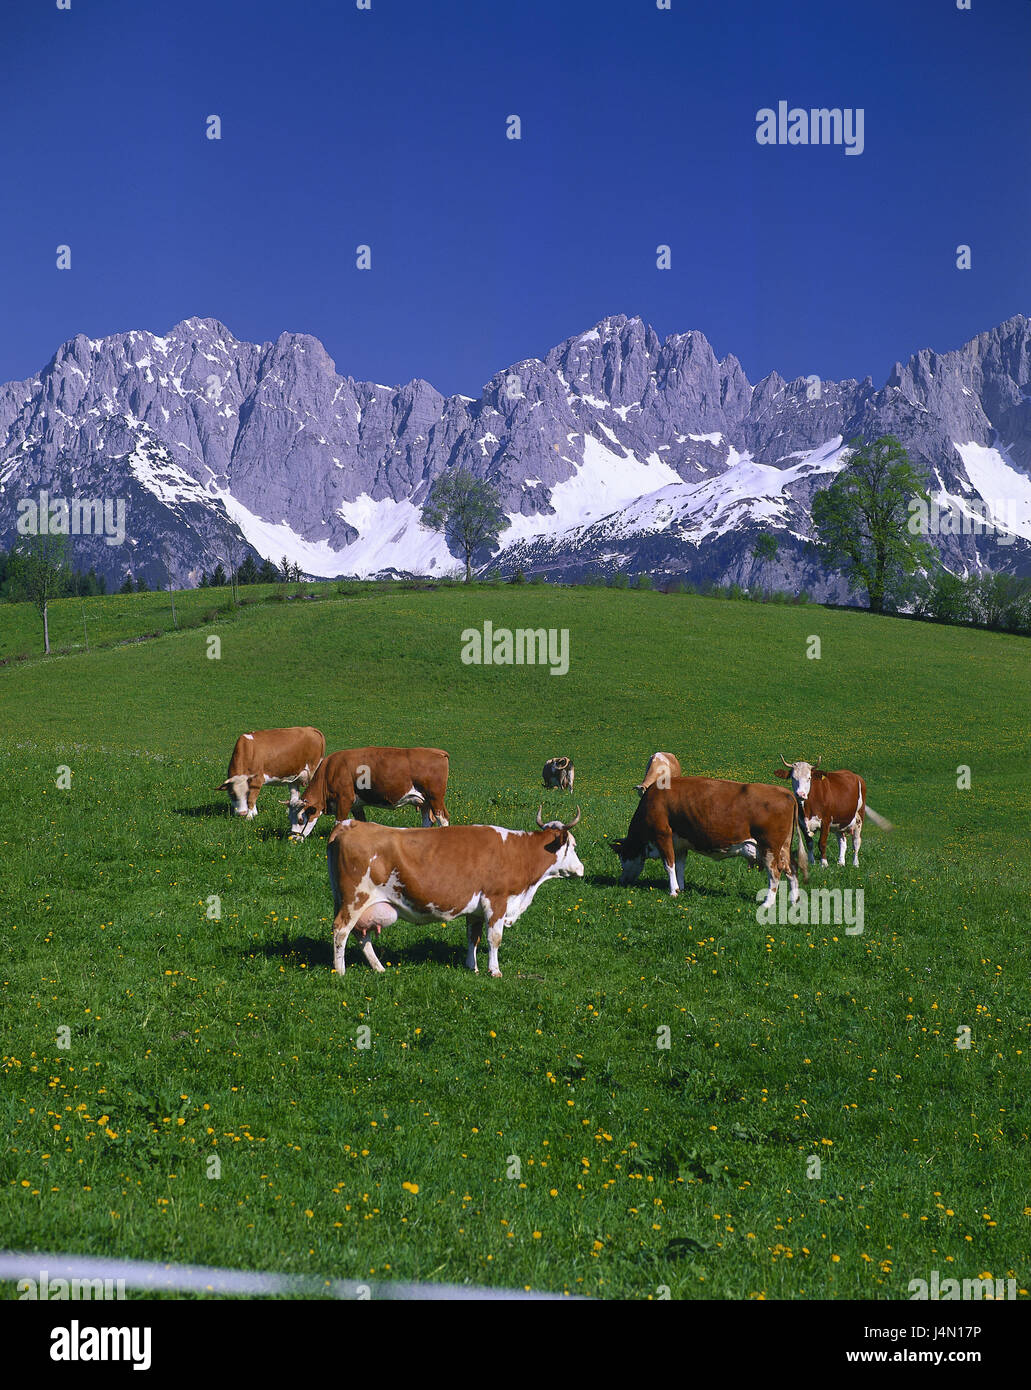 Austria, Tyrol, Kitzbuehel, Wilder Kaiser, Ellmauer stop, pasture, cows, Simmentaler cortexes, alps, Kaisergebirge, agriculture, meadow, animals, cattle breeding, keeping of pets, cow's focuses, scenery, rurally, summer, outside, deserted, sky, blue, cloudless, Stock Photo